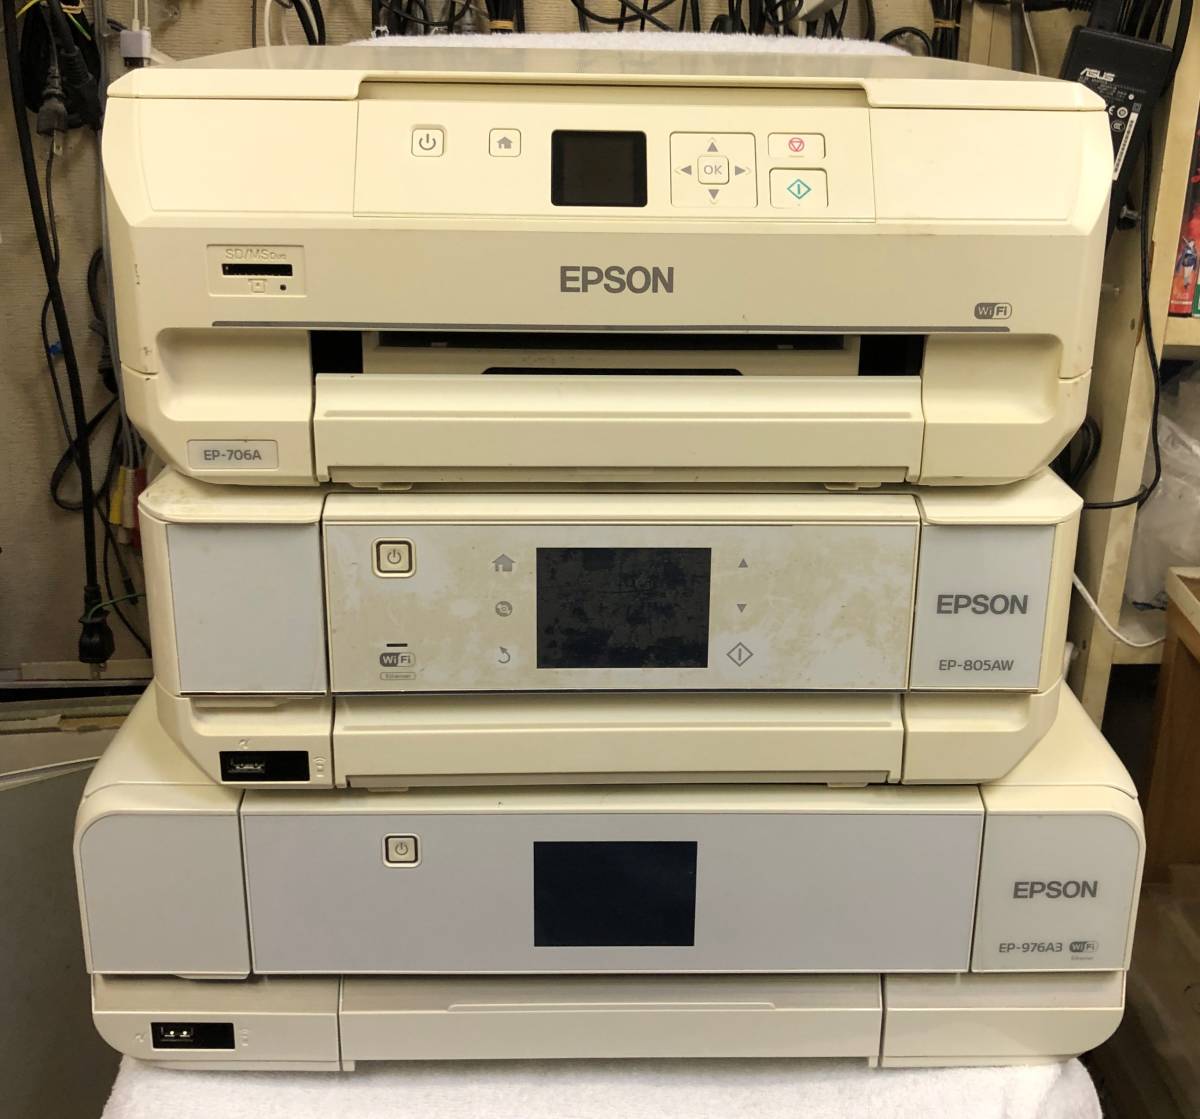 EPSON エプソン インクジェットプリンター EP-805AW EP-777A EP-976A3